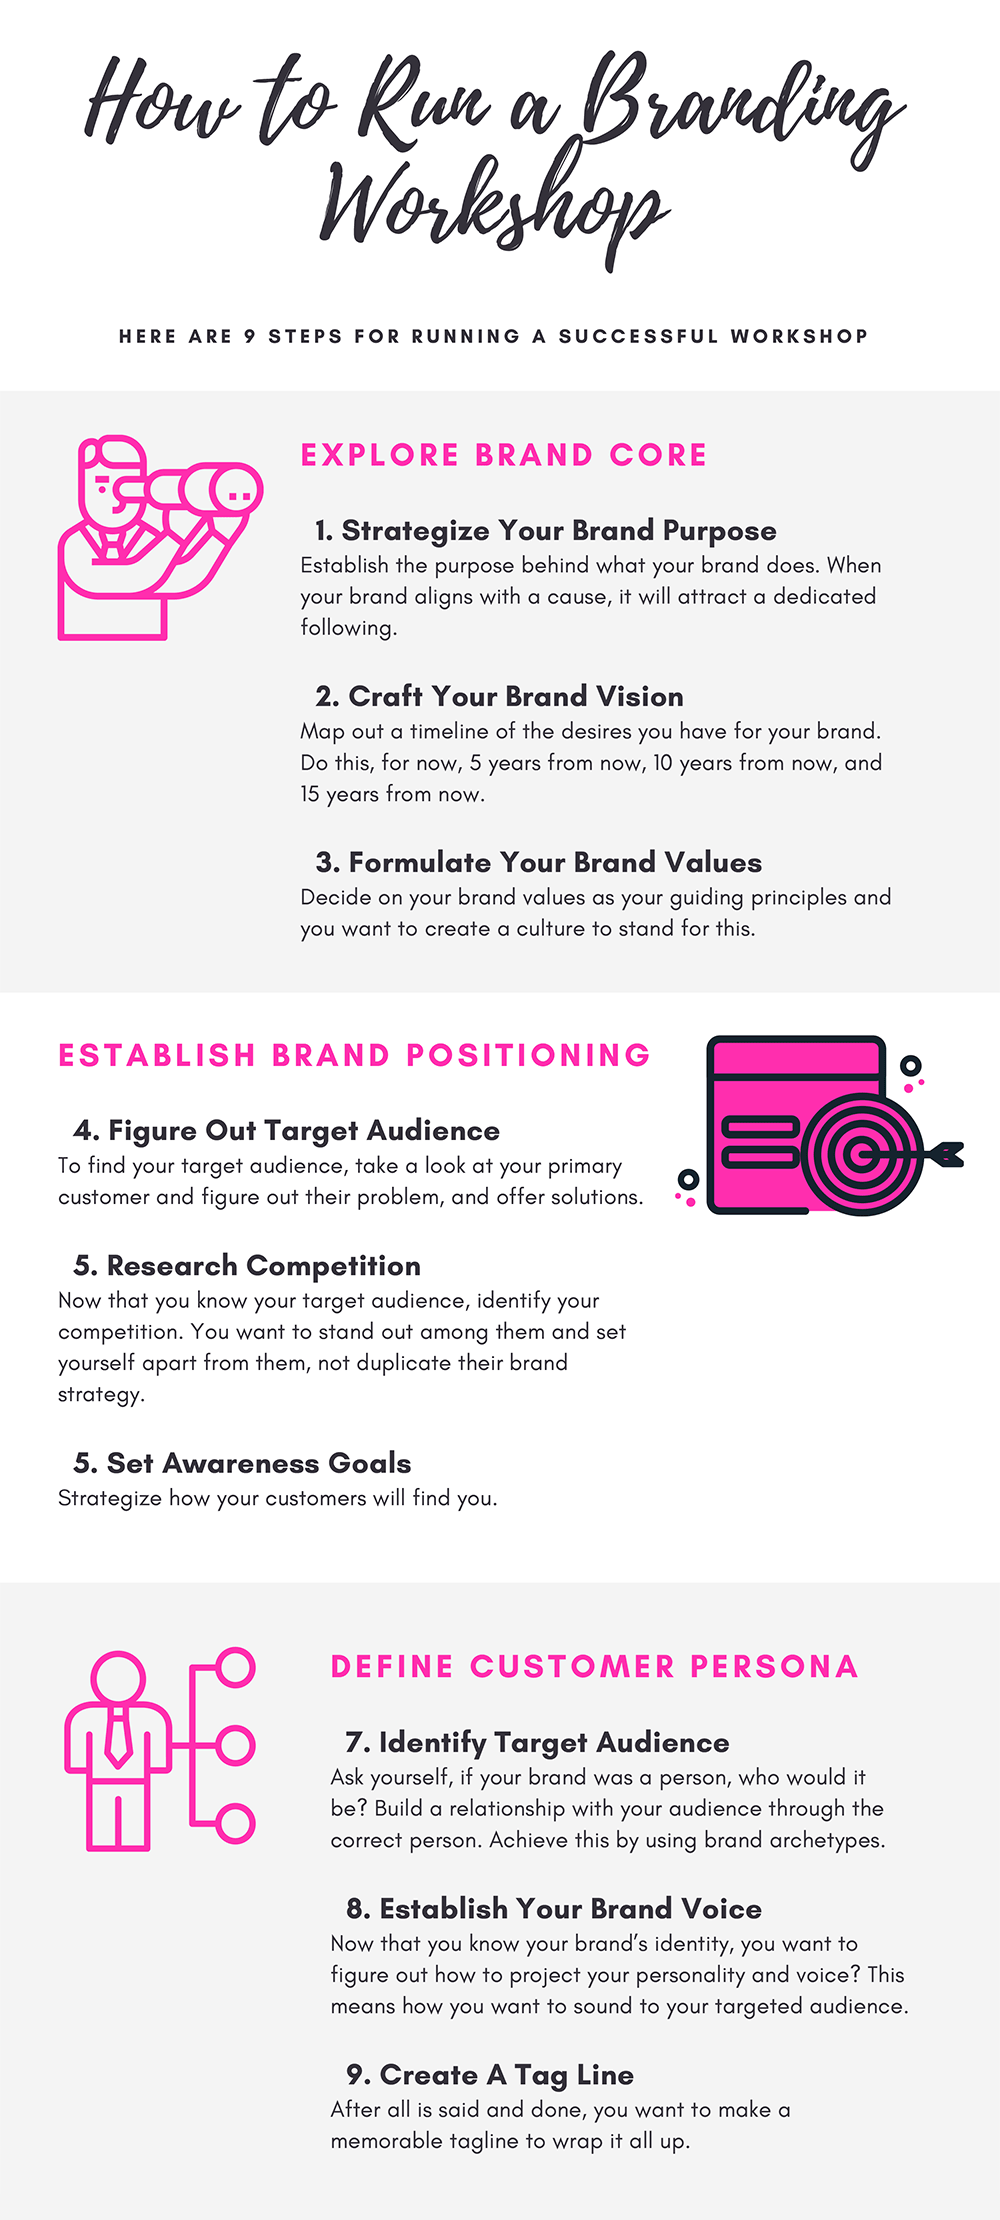 How To Run a Brand Strategy Workshop Infographic